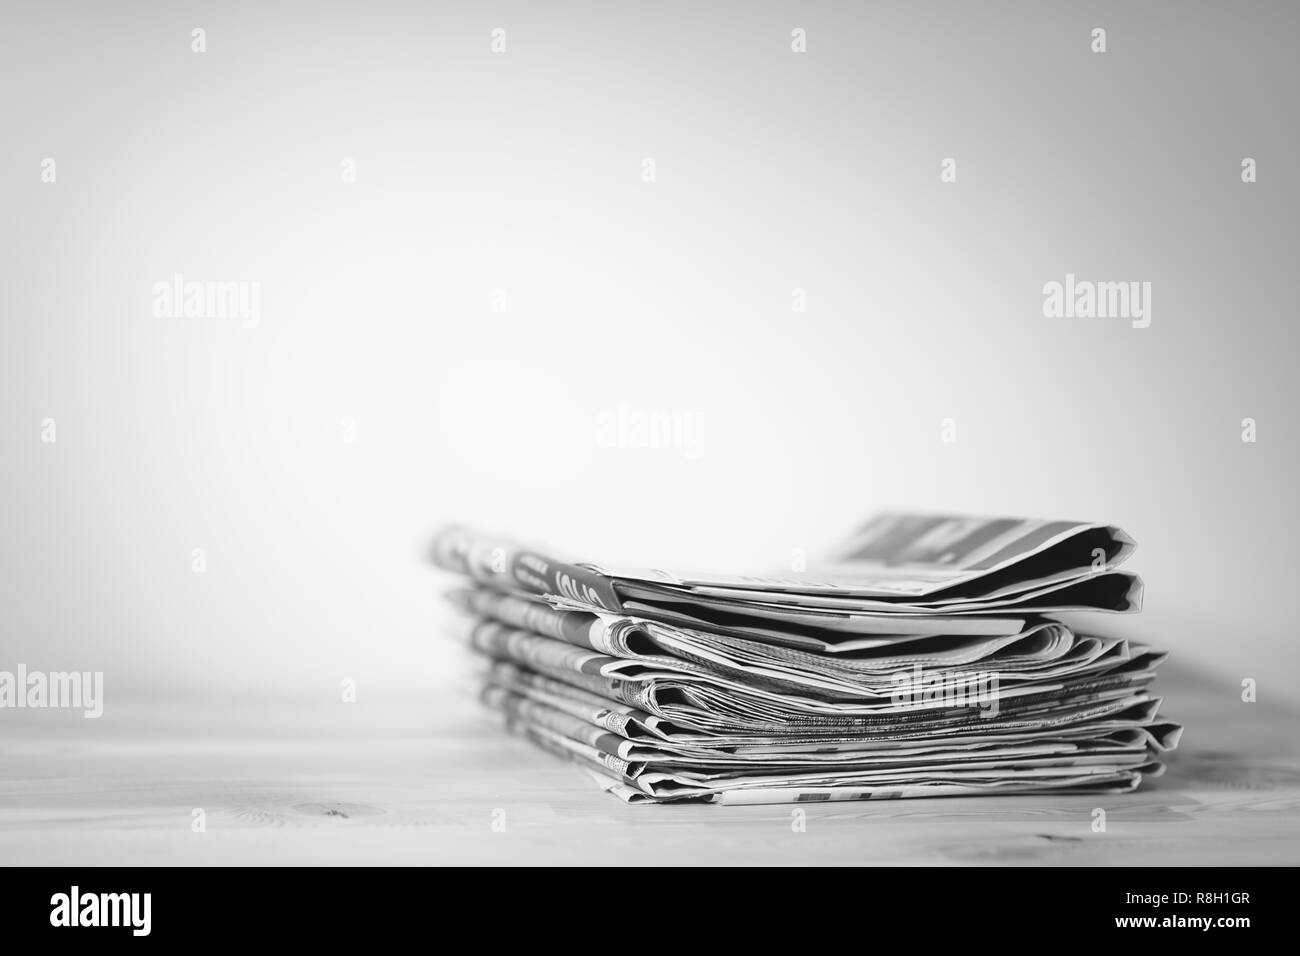 Newspaper on wooden table Stock Photo